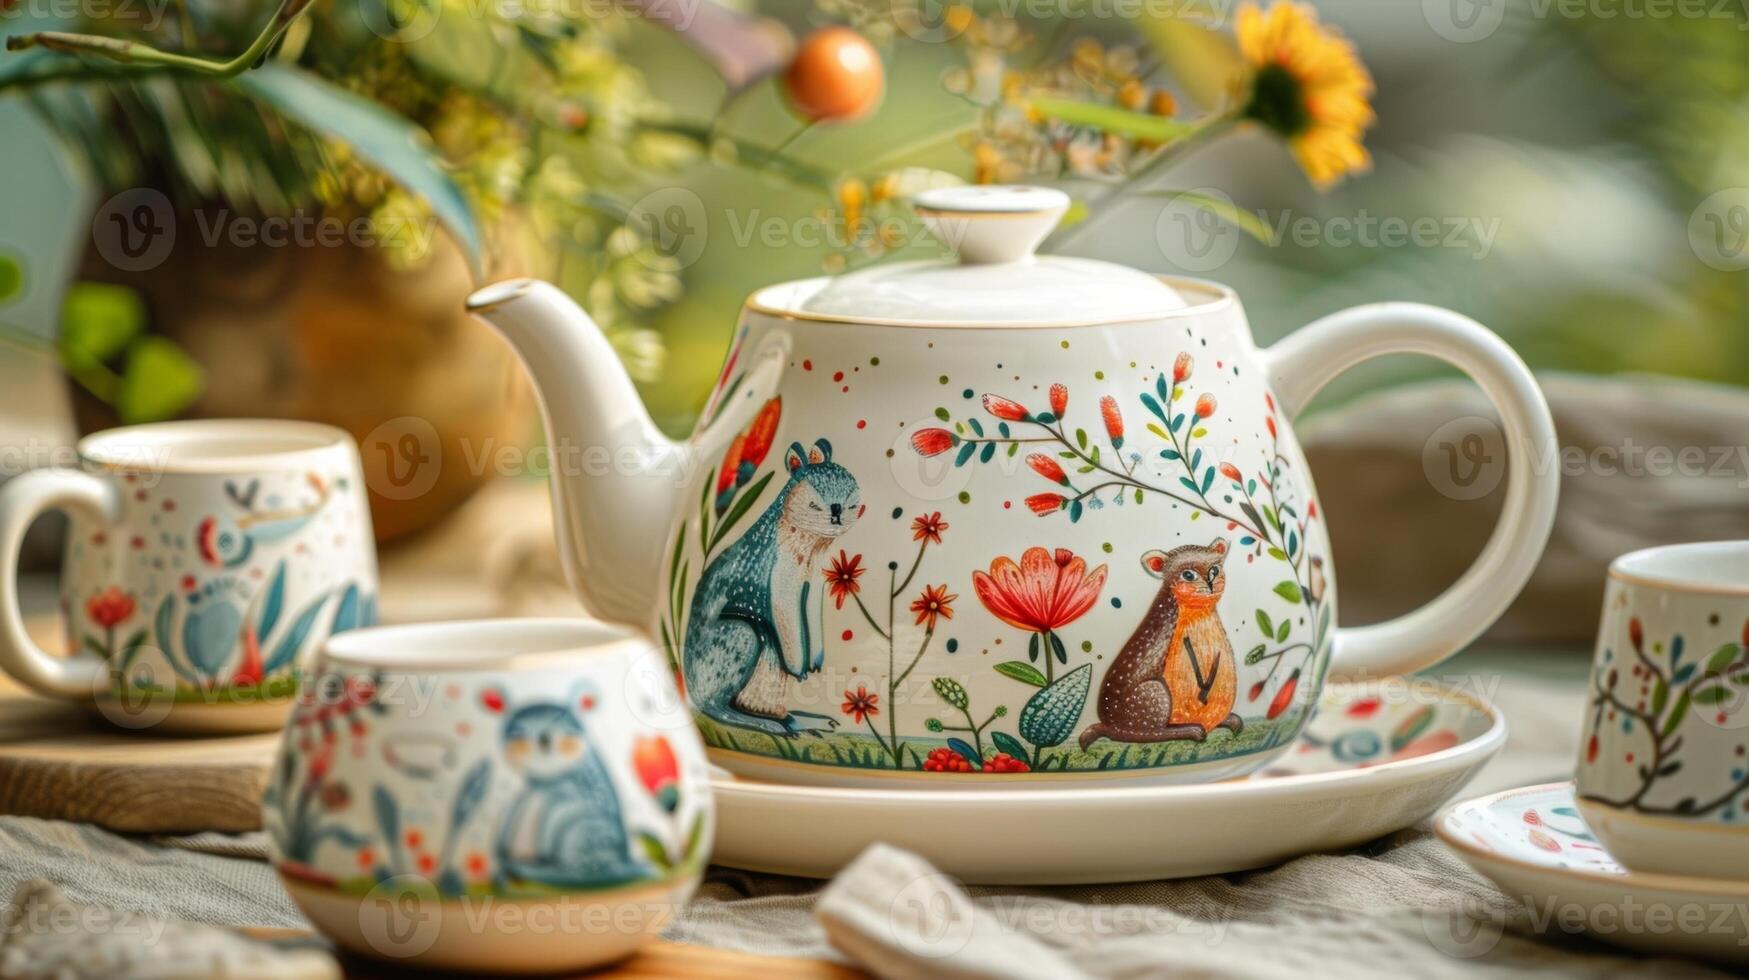 A whimsical tea set with a handpainted woodland design featuring e animals and colorful plants on a creamcolored background. photo